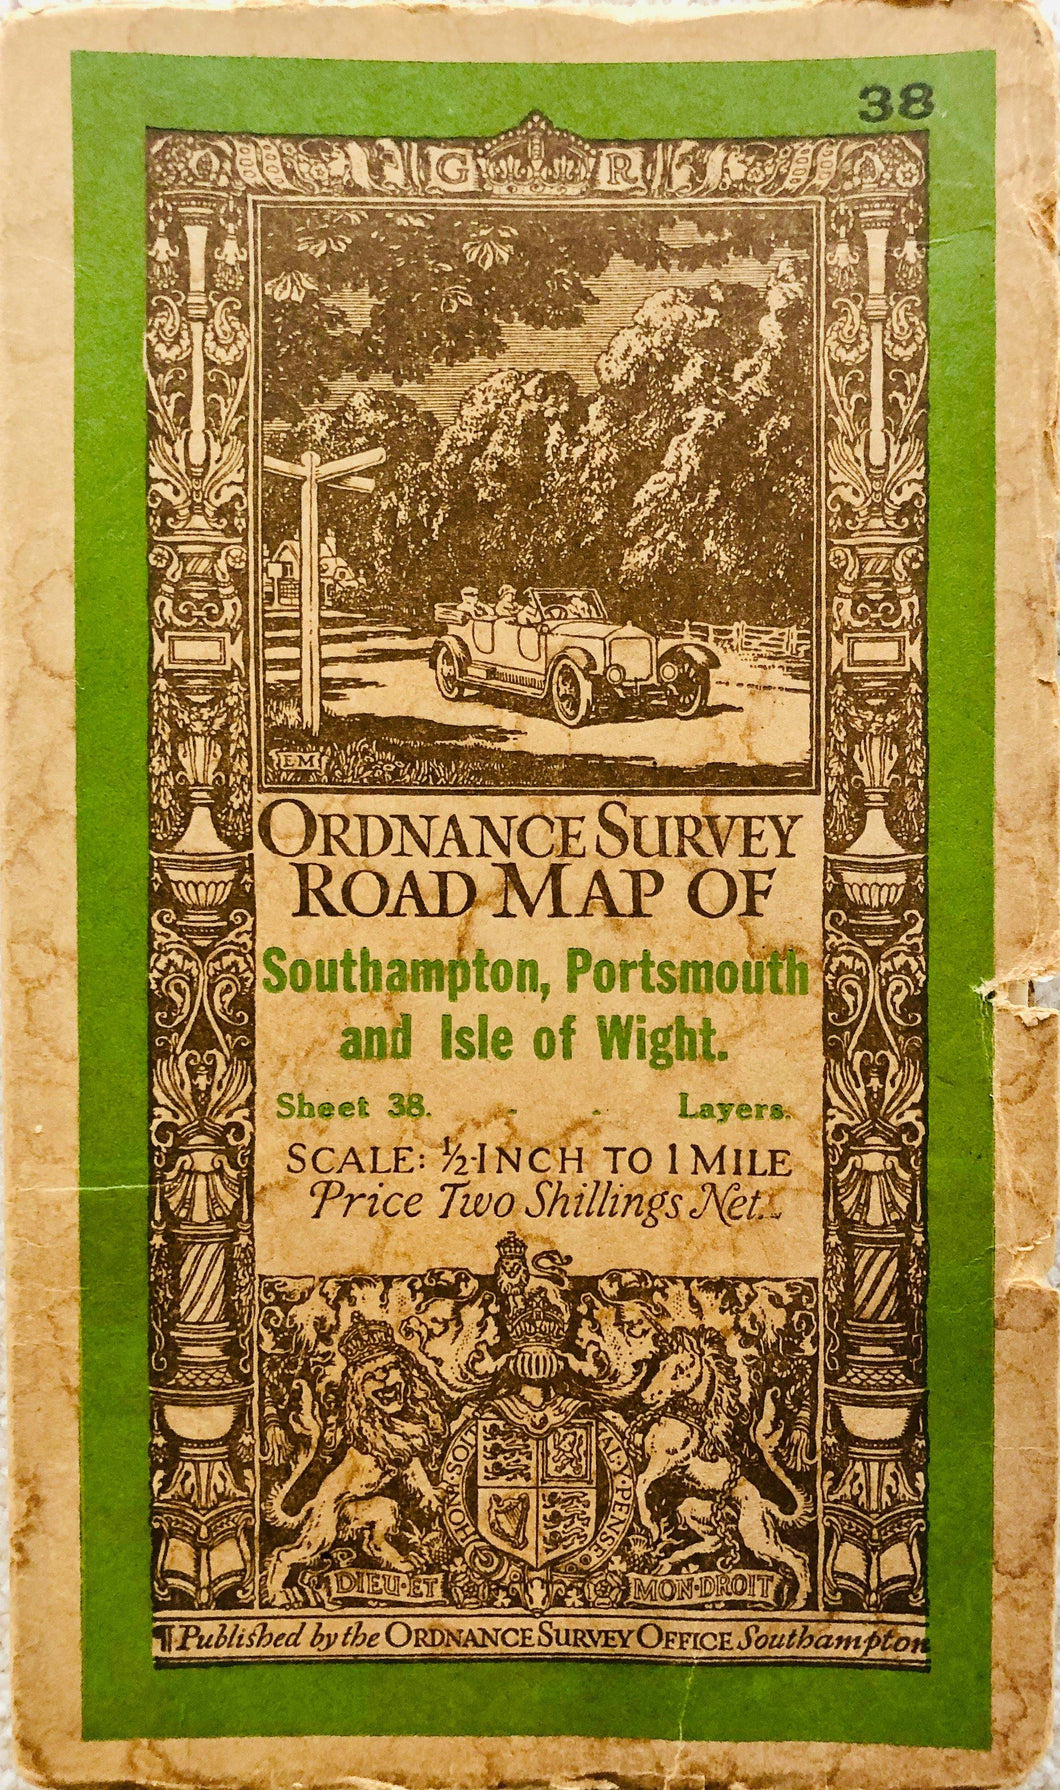 Ordnance Survey Map of the Isle of Wight, printed on paper, 1929 - The Seaview Collection